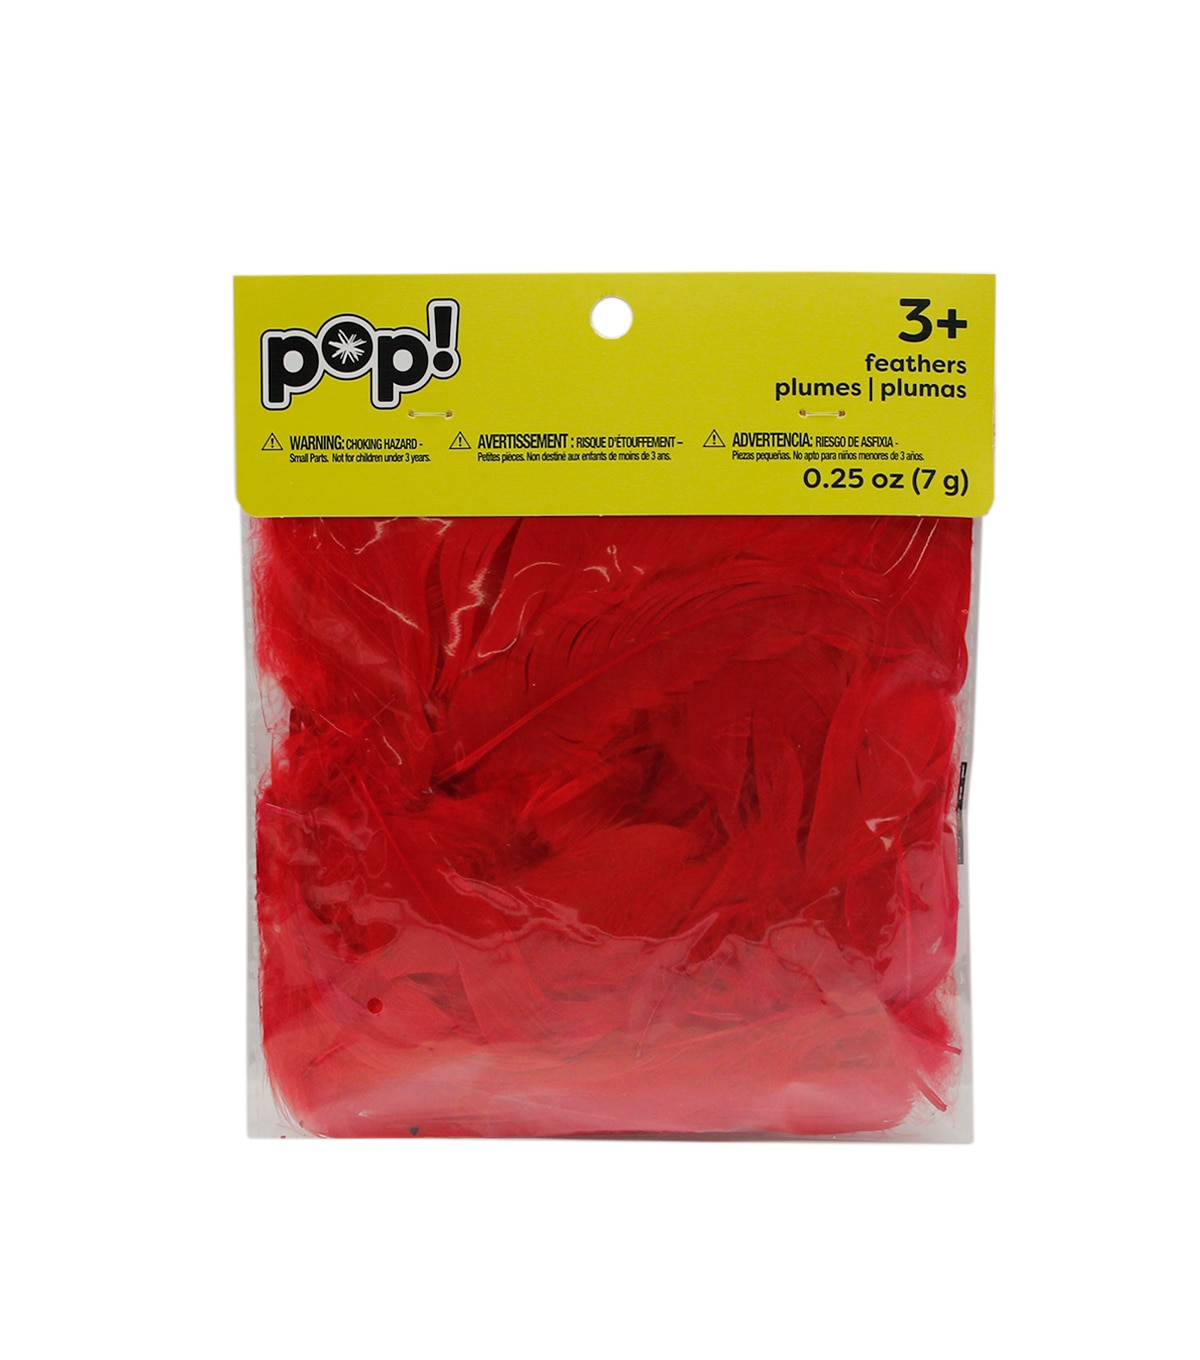 Marabou Feather Strip MSTRIP-RED: 35mm - Red